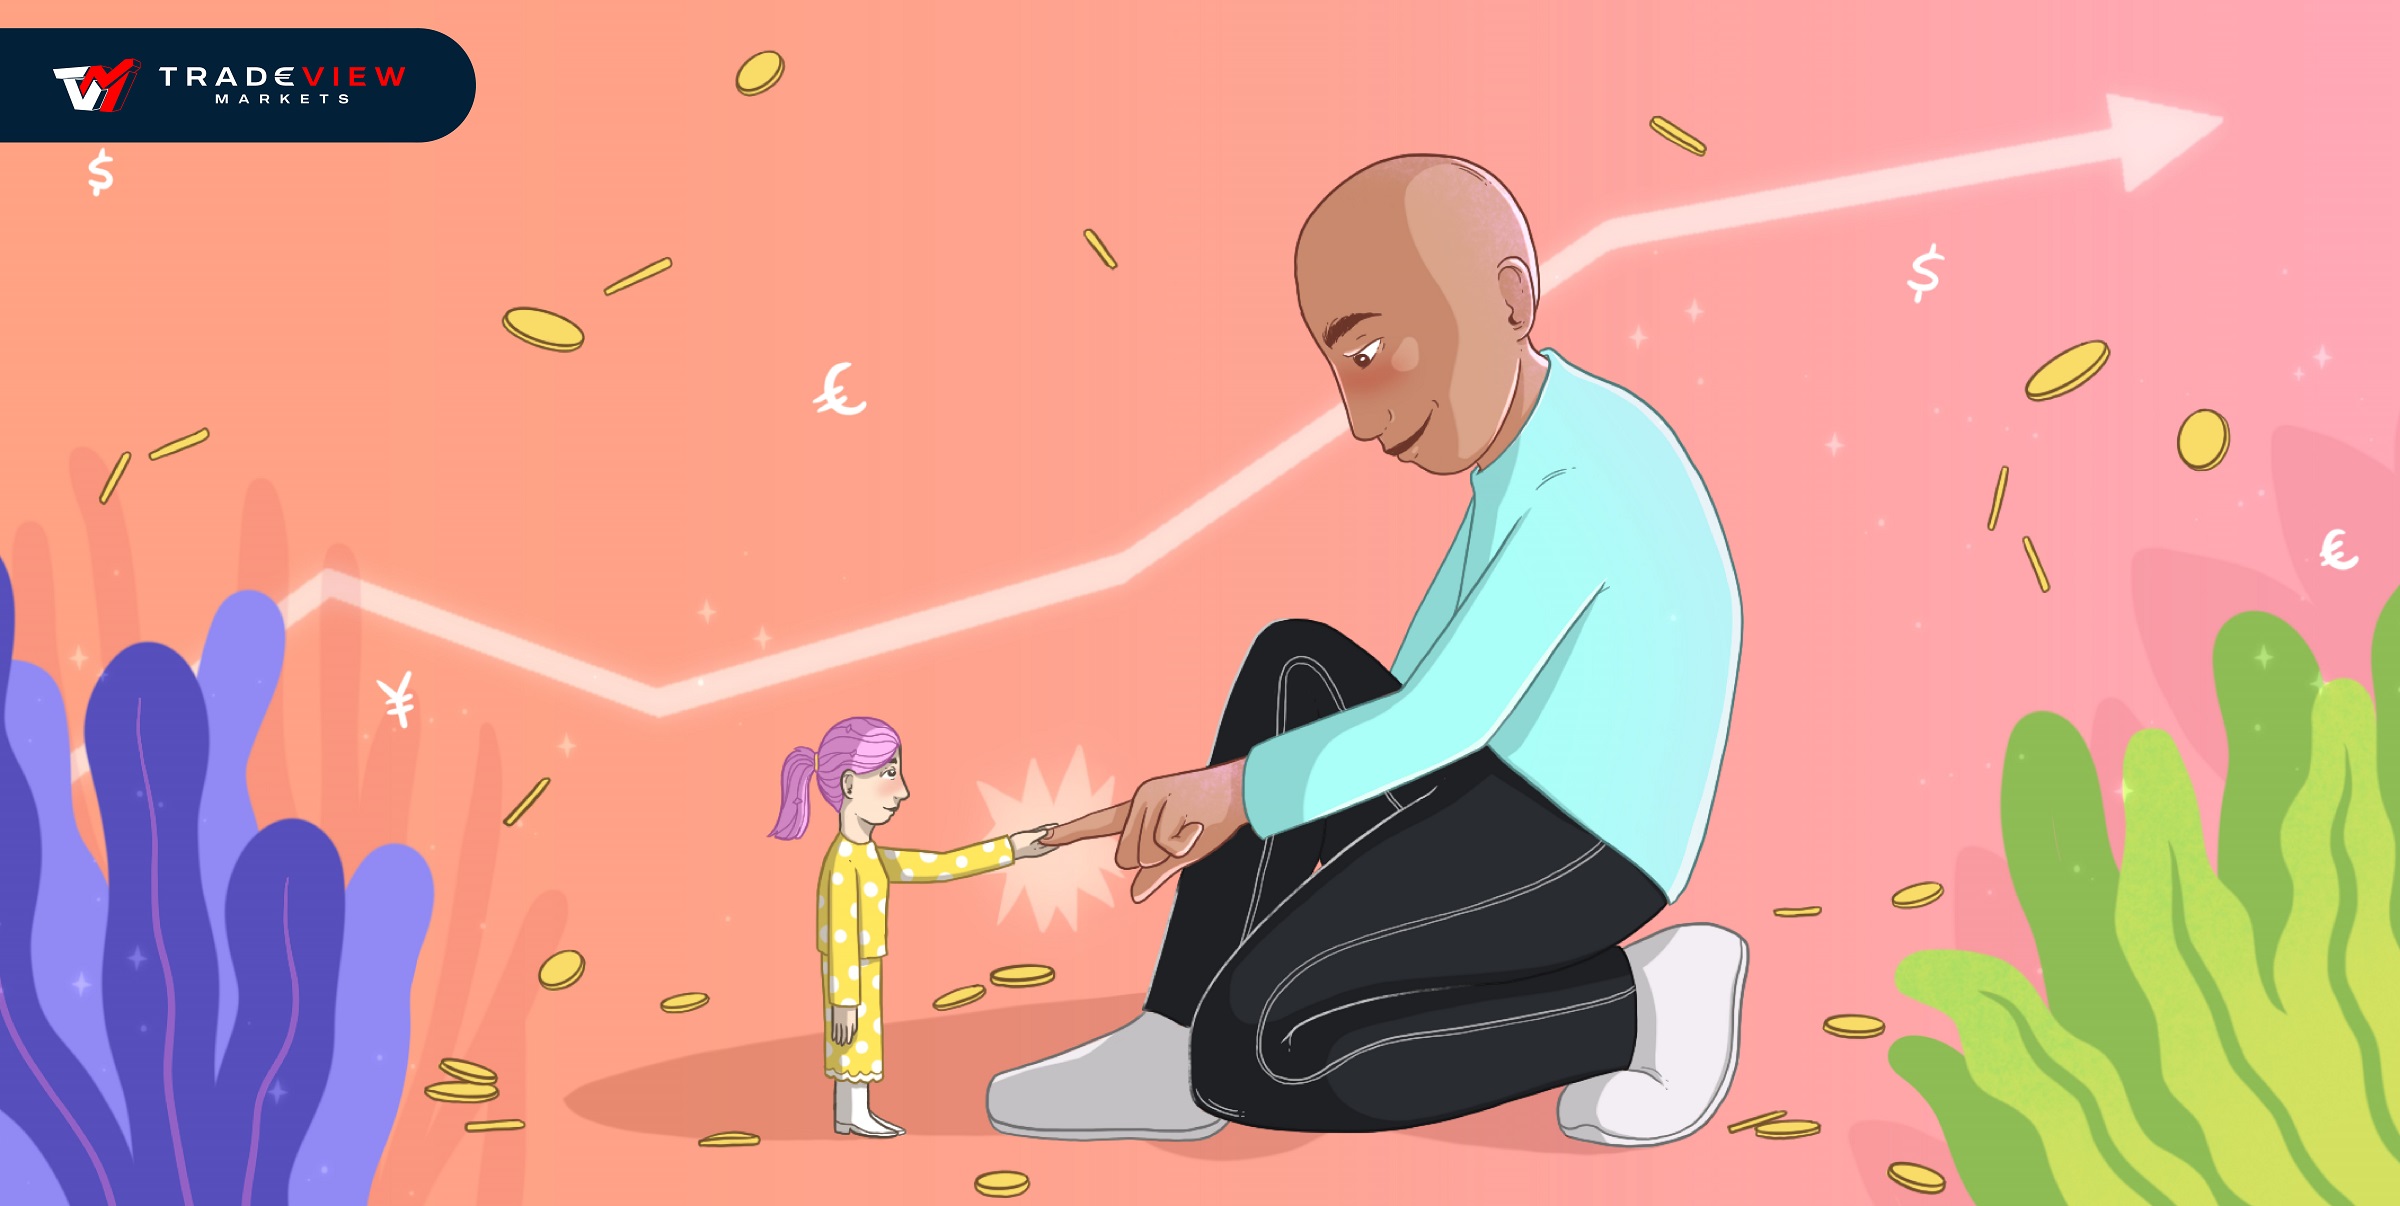 a man kneeling down holding a small girl's hand